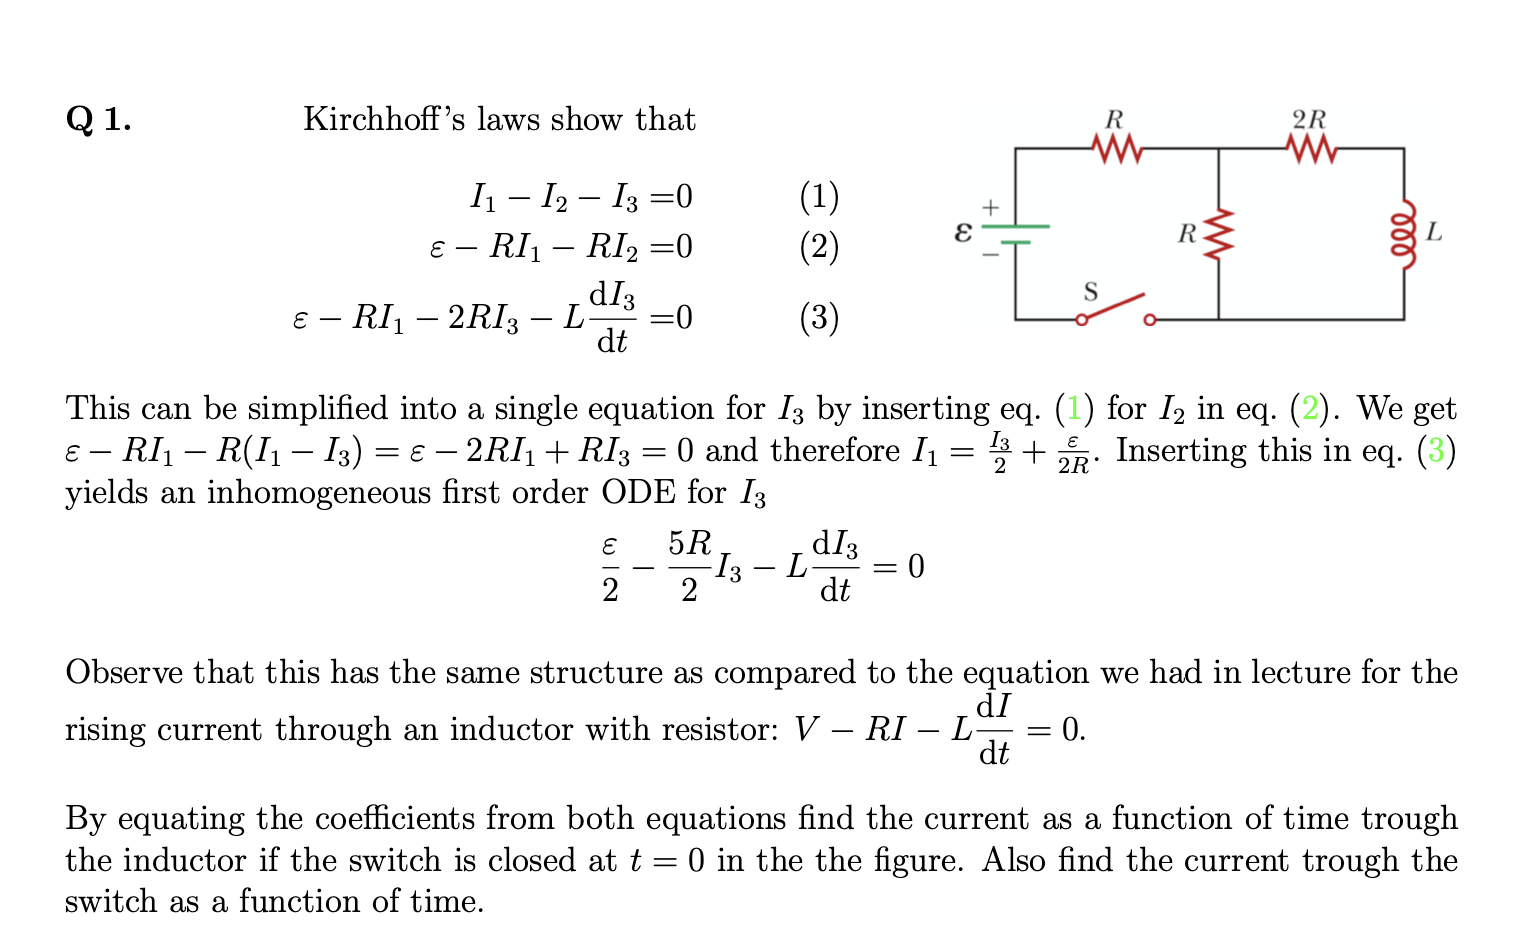 Q 1.
Kirchhoff's laws show that
R
2R
I – I2 – I3 =0
ɛ – RI1 – RI2 =0
(1)
(2)
|
R
dI3
=0
dt
ɛ – RI – 2RI3
(3)
-
This can be simplified into a single equation for I3 by inserting eq. (1) for I2 in eq. (2). We get
E – RI1 – R(I1 – I3) = € – 2RI1 + RI3 = 0 and therefore I1
yields an inhomogeneous first order ODE for I3
I3
Inserting this in eq. (3)
2R'
dI3
I3 – L
dt
5R
2
0 =
Observe that this has the same structure as compared to the equation we had in lecture for the
dI
rising current through an inductor with resistor: V – RI – L
0.
-
-
dt
By equating the coefficients from both equations find the current as a function of time trough
the inductor if the switch is closed at t = 0 in the the figure. Also find the current trough the
switch as a function of time.
ll
